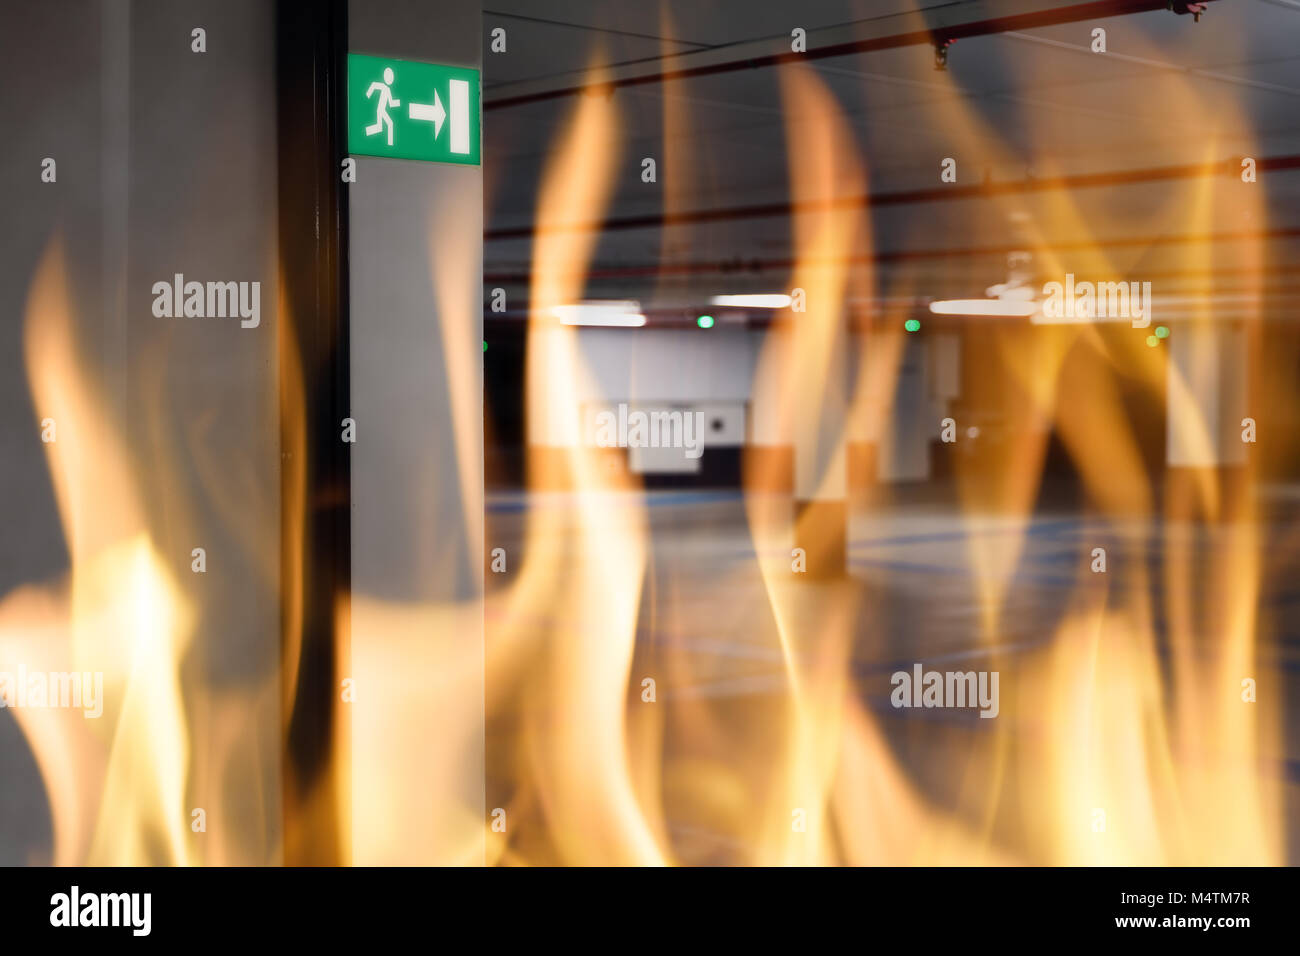 Fire against emergency exit sign at entrance of underground parking lot Stock Photo